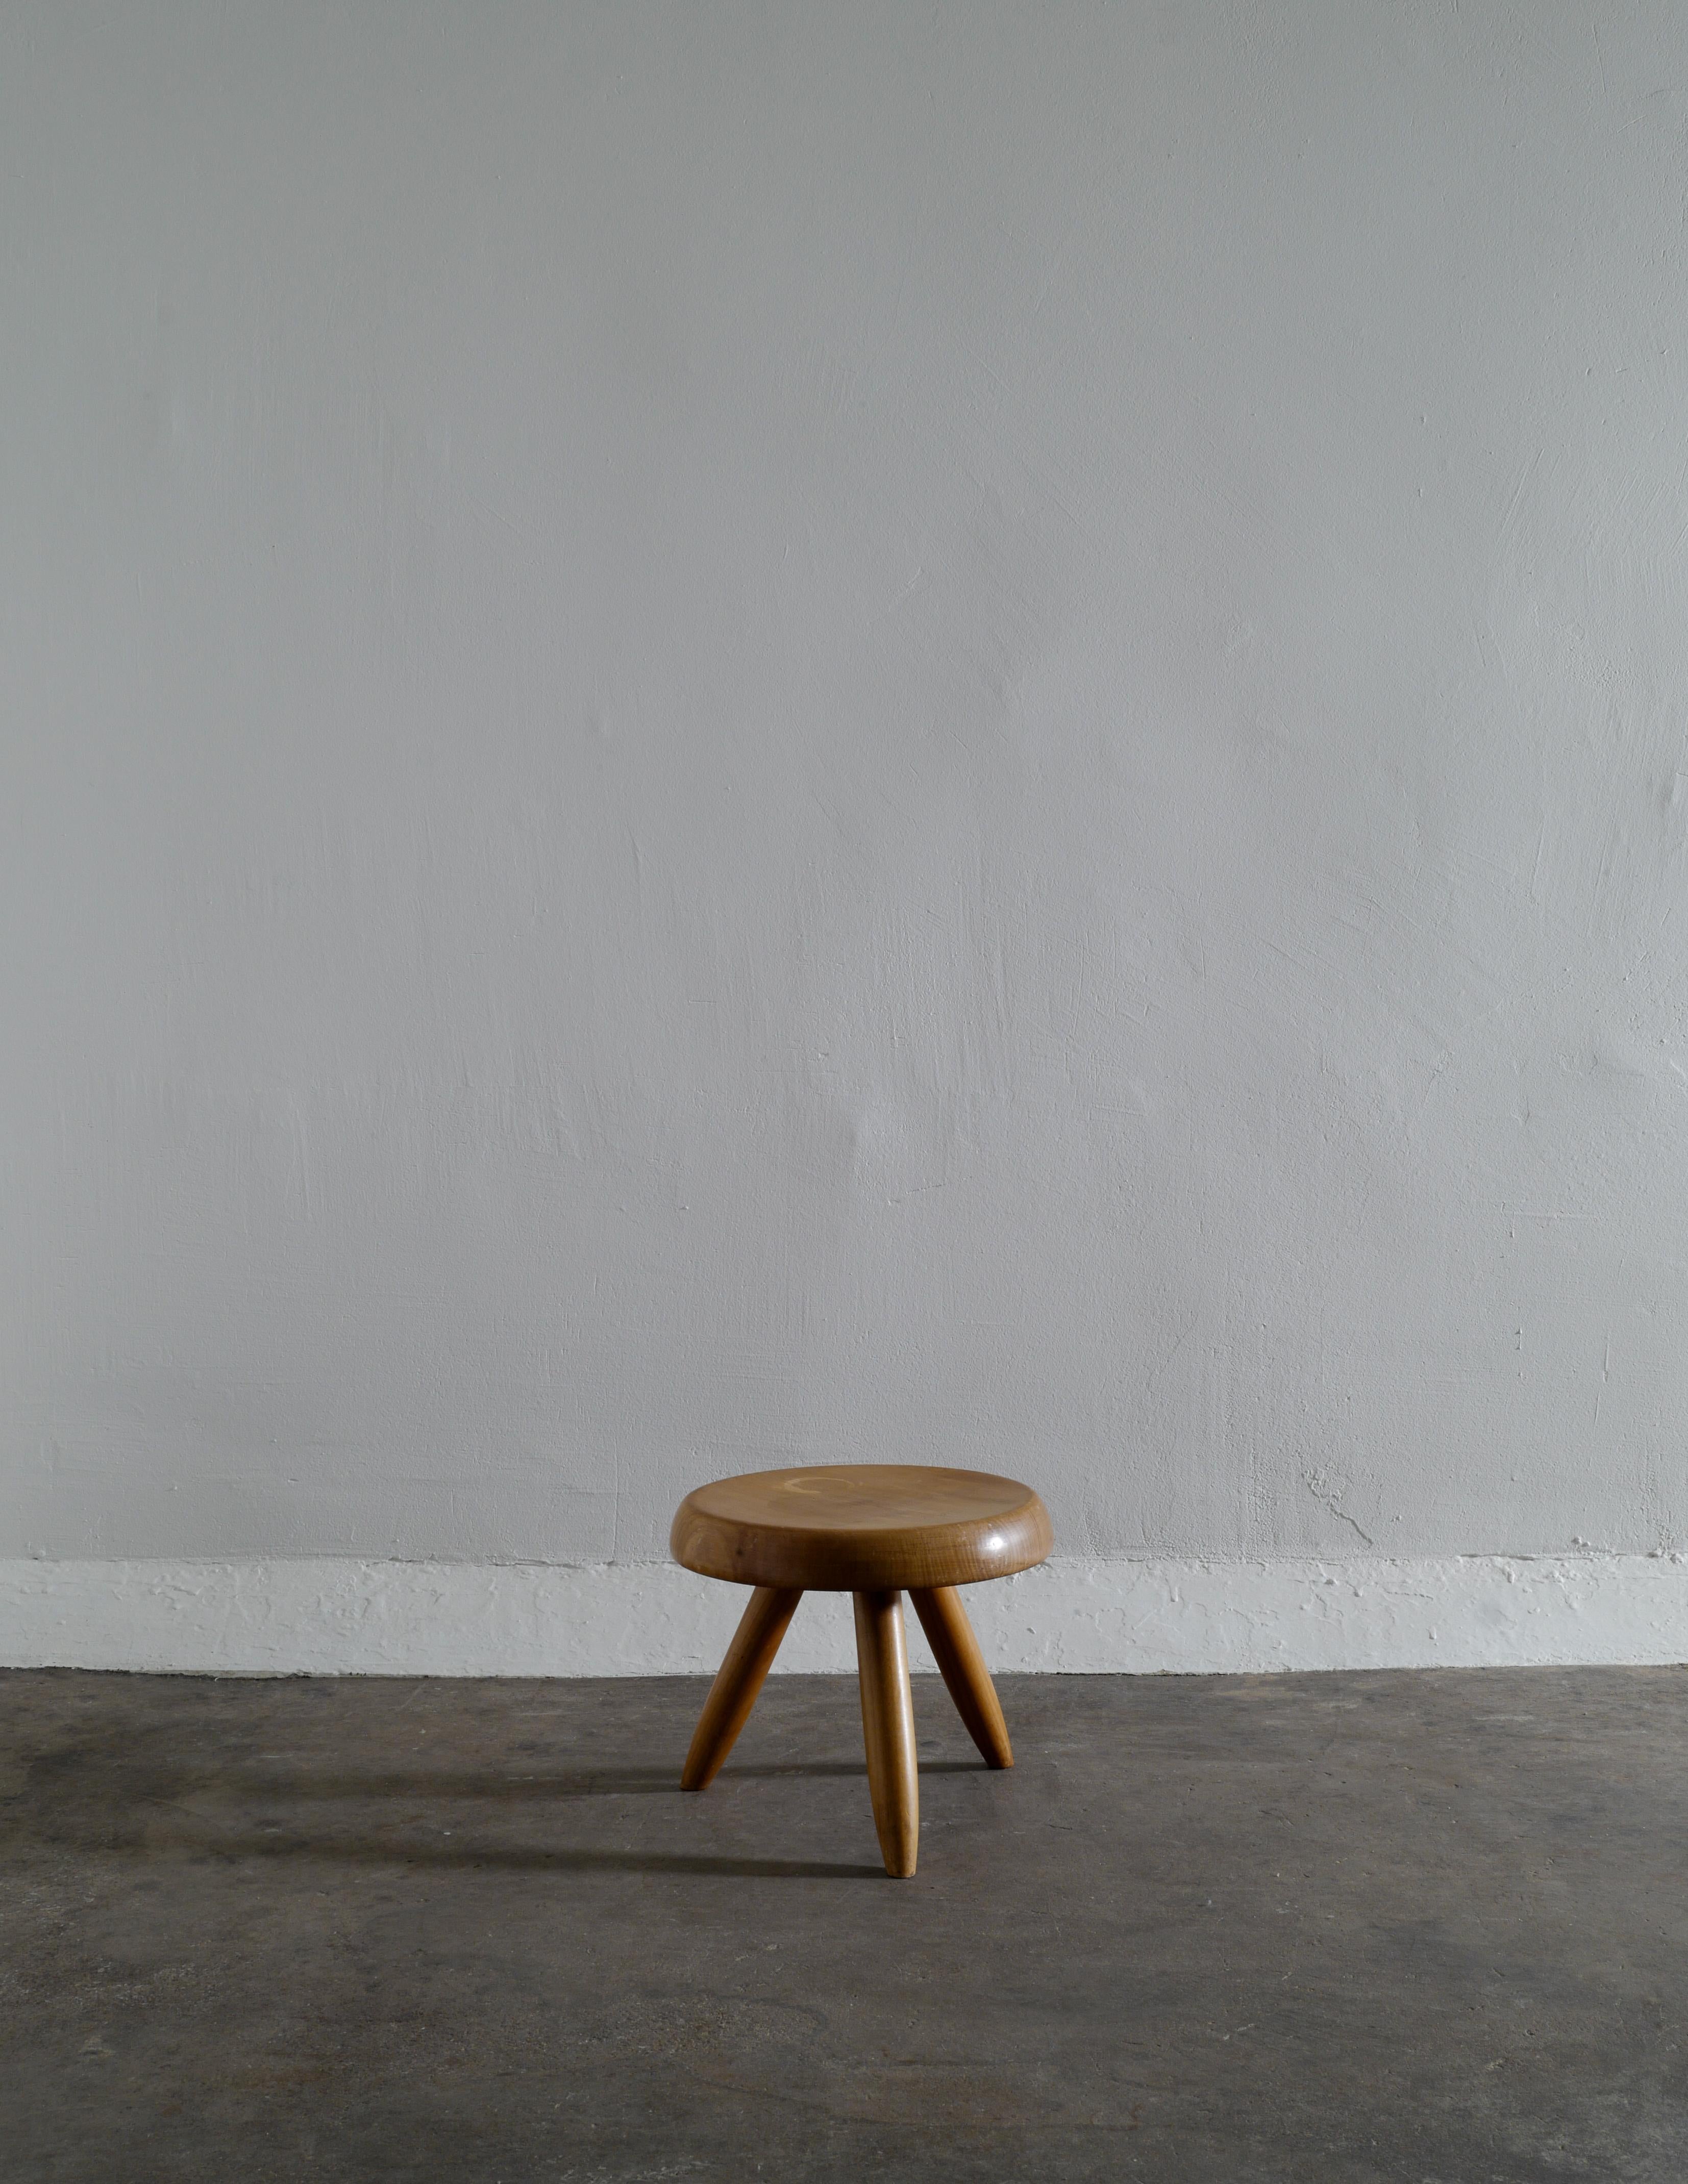 Rare and original berger stool / tabouret in ash designed by Charlotte Perriand and produced in the 1960s. In good vintage condition with signs from age and use. Dimensions: Height 27 cm diameter: 32 cm.